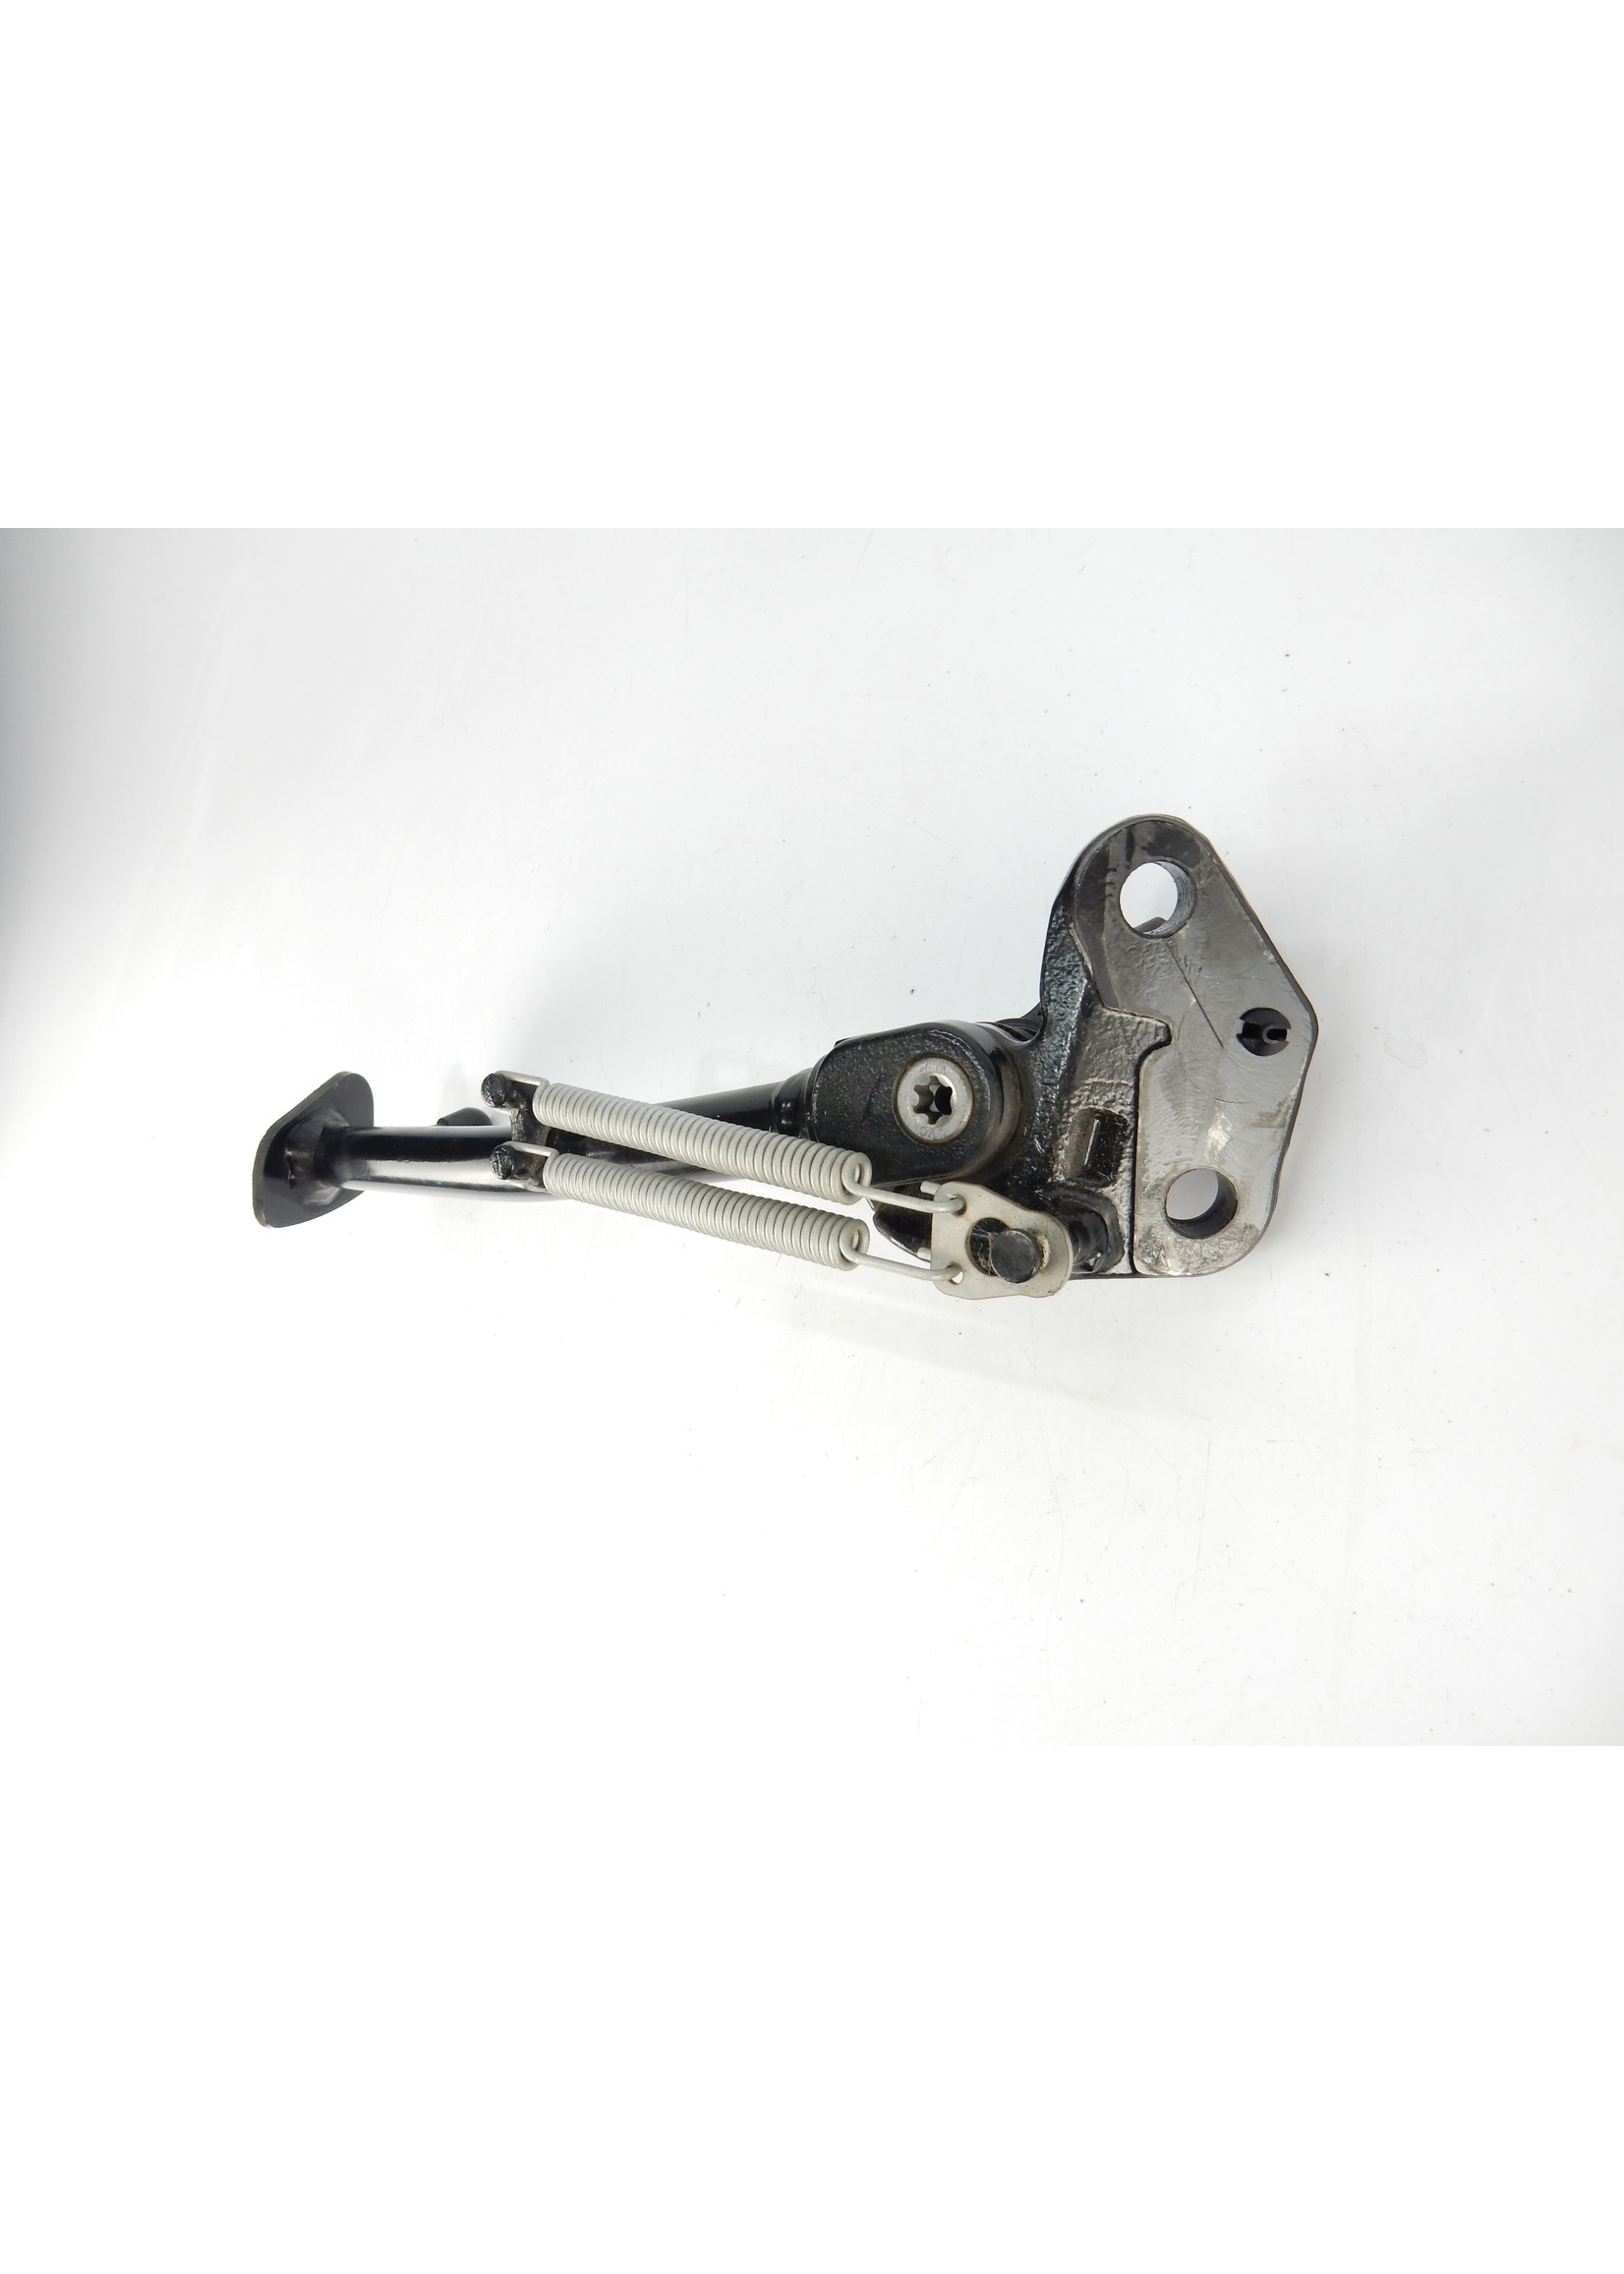 BMW BMW K 1600 GTL Side stand / Supporting bracket f side stand / Switch, side stand / 46538521294 / 46538521296 / 61318388642